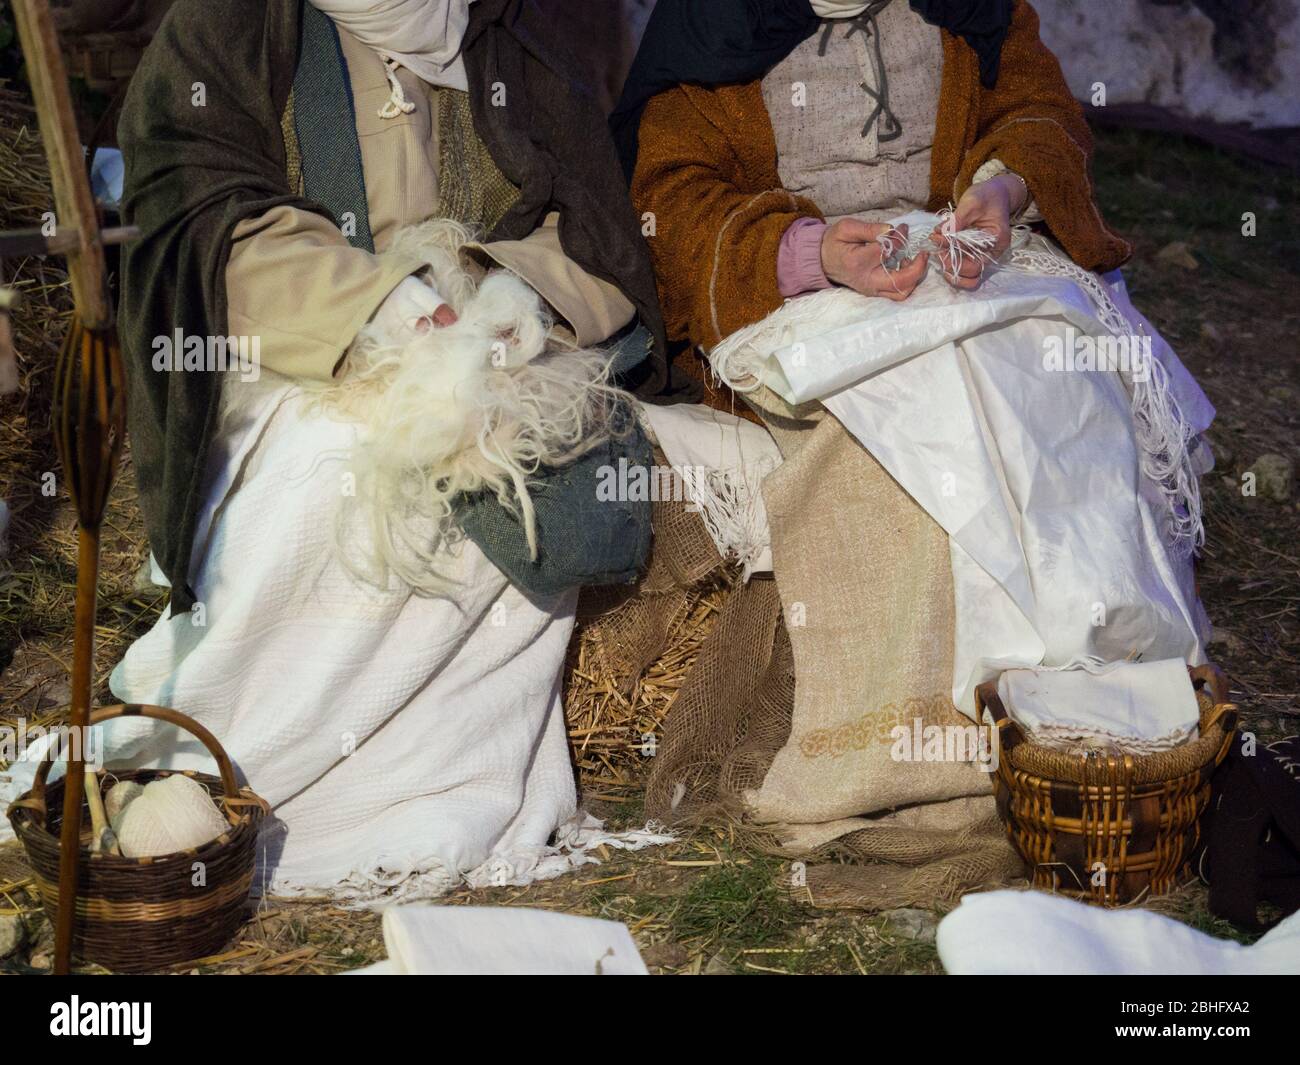 Women from a village work the wool and mend fabrics sitting on a straw bale. Stock Photo